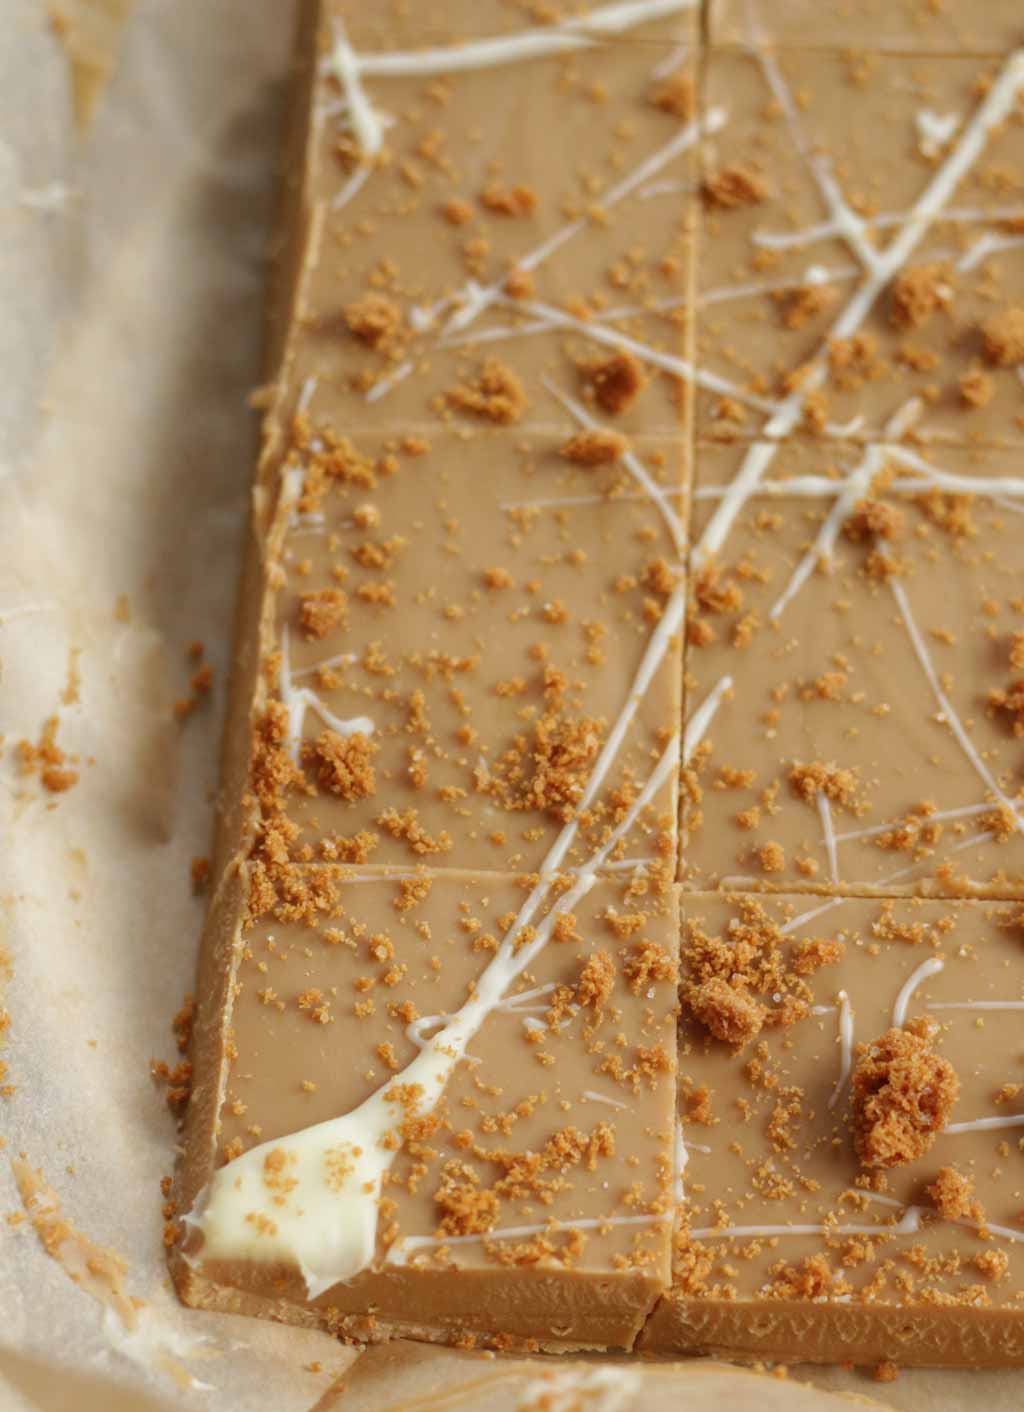 Fudge block With White Chocolate Drizzle And Biscoff Crumbs